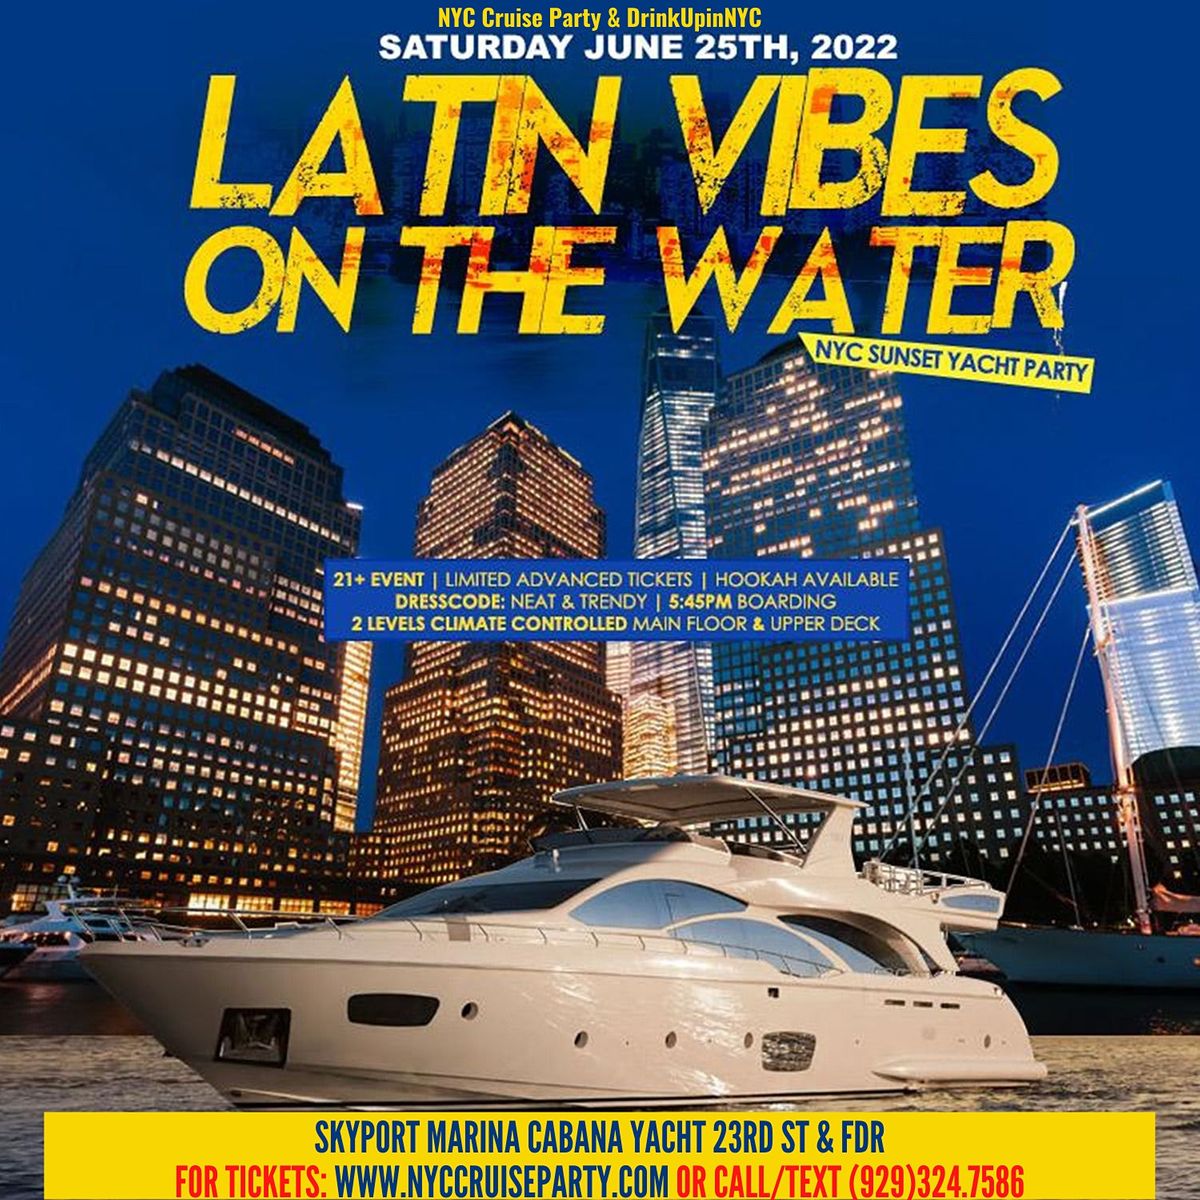 LATIN VIBES ON THE WATER